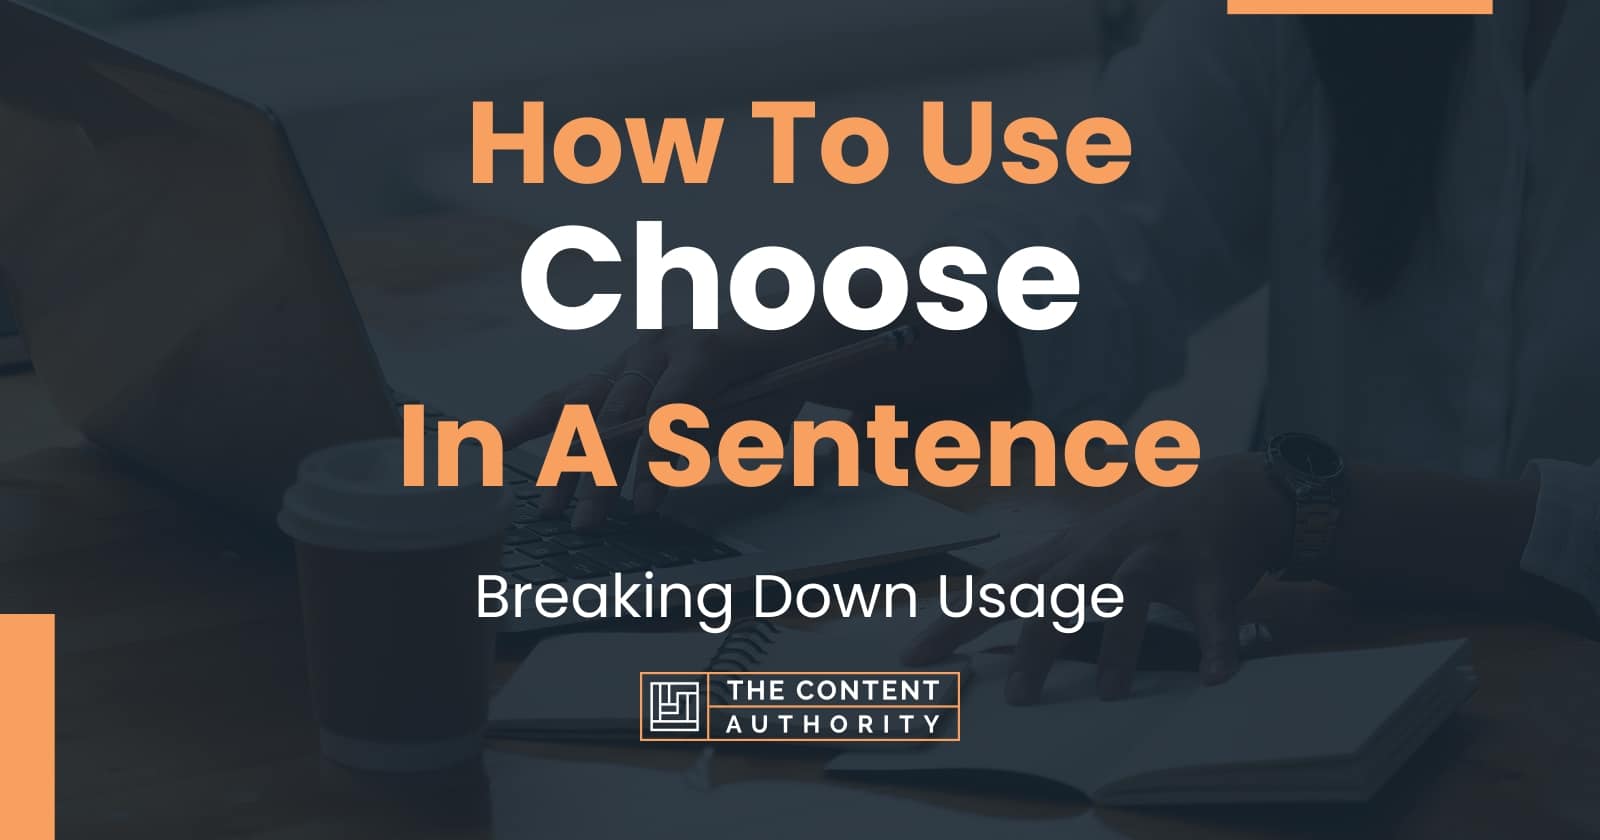 how-to-use-choose-in-a-sentence-breaking-down-usage